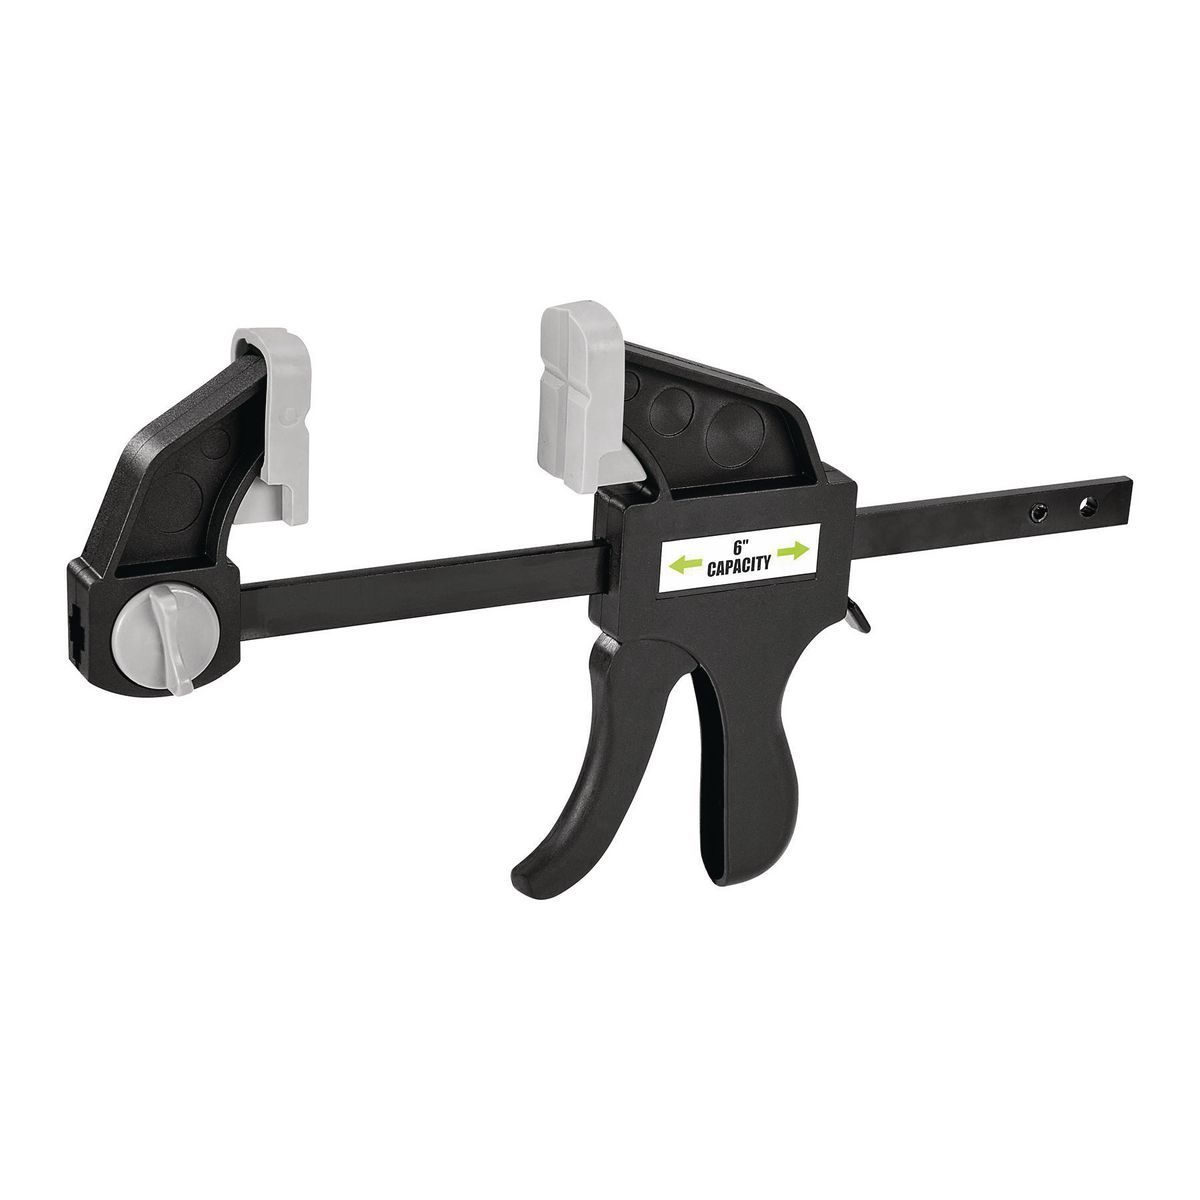 PITTSBURGH 6 in. Ratcheting Bar Clamp/Spreader